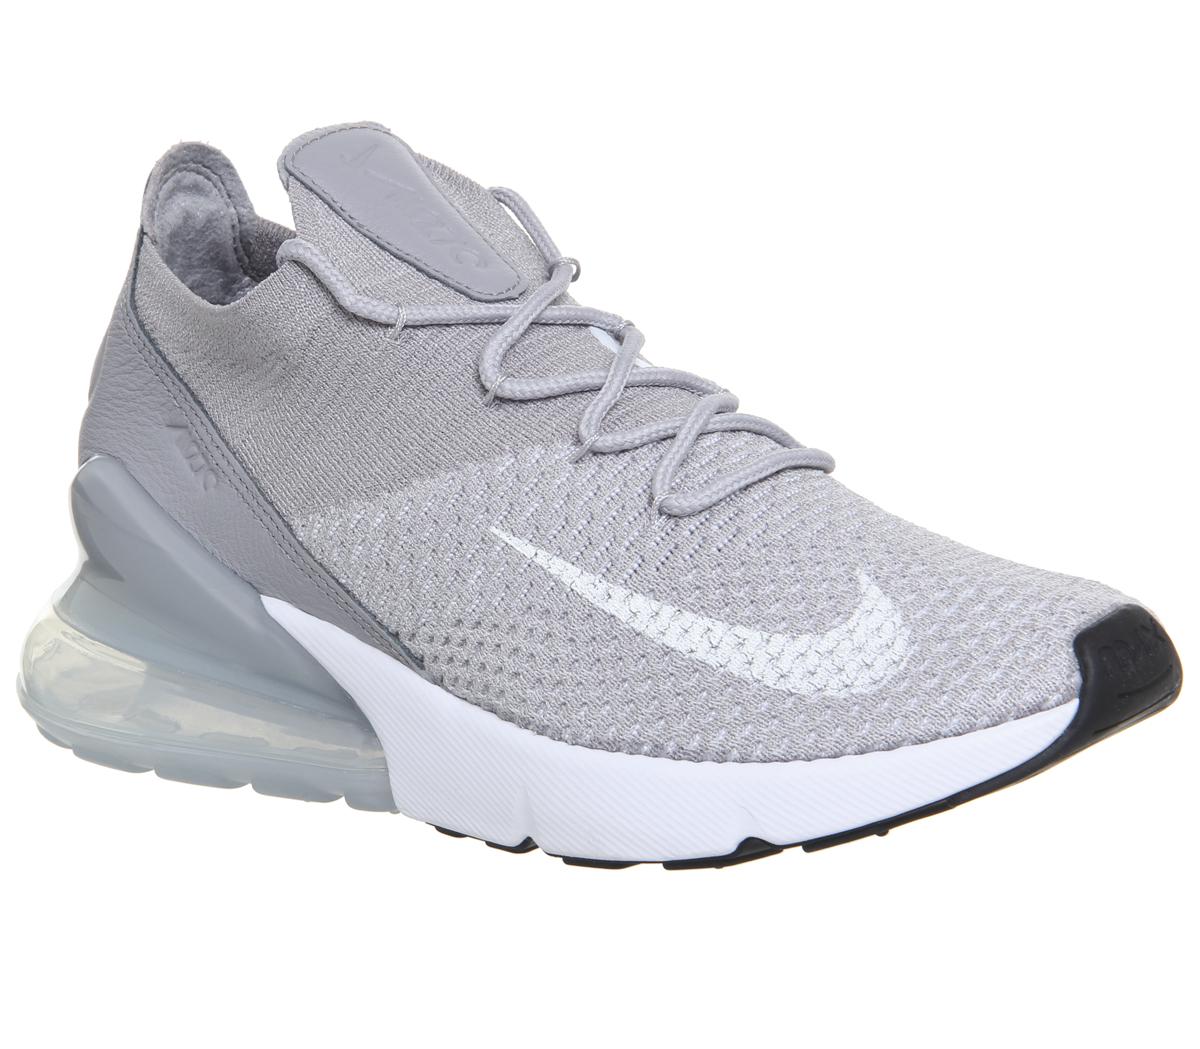 Air Max 270 Flyknit Grey Hot Sale, UP 